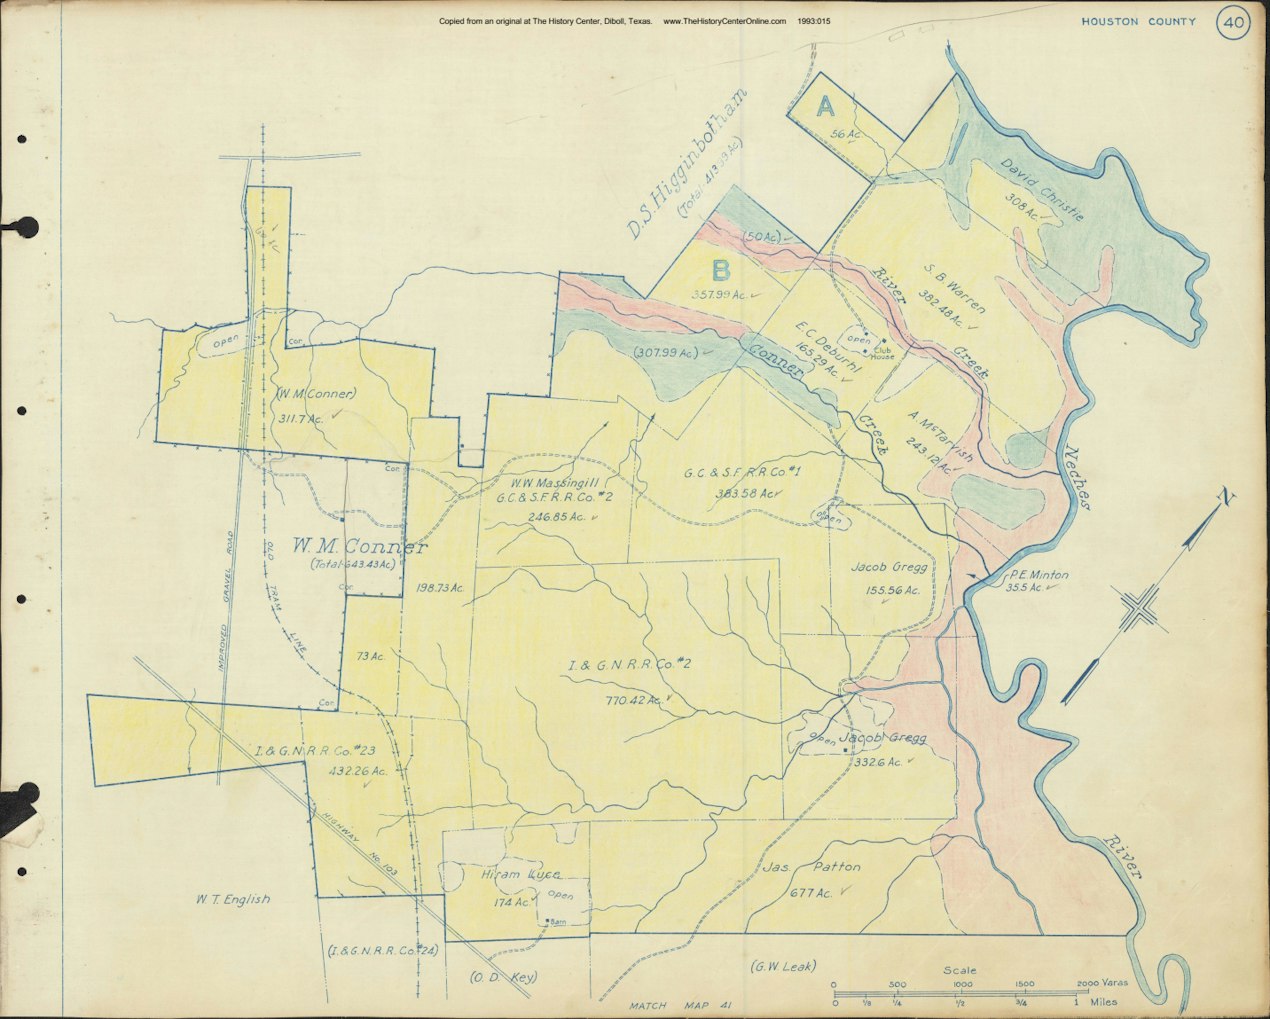 044 1945 Houston County Timberlands Map 040